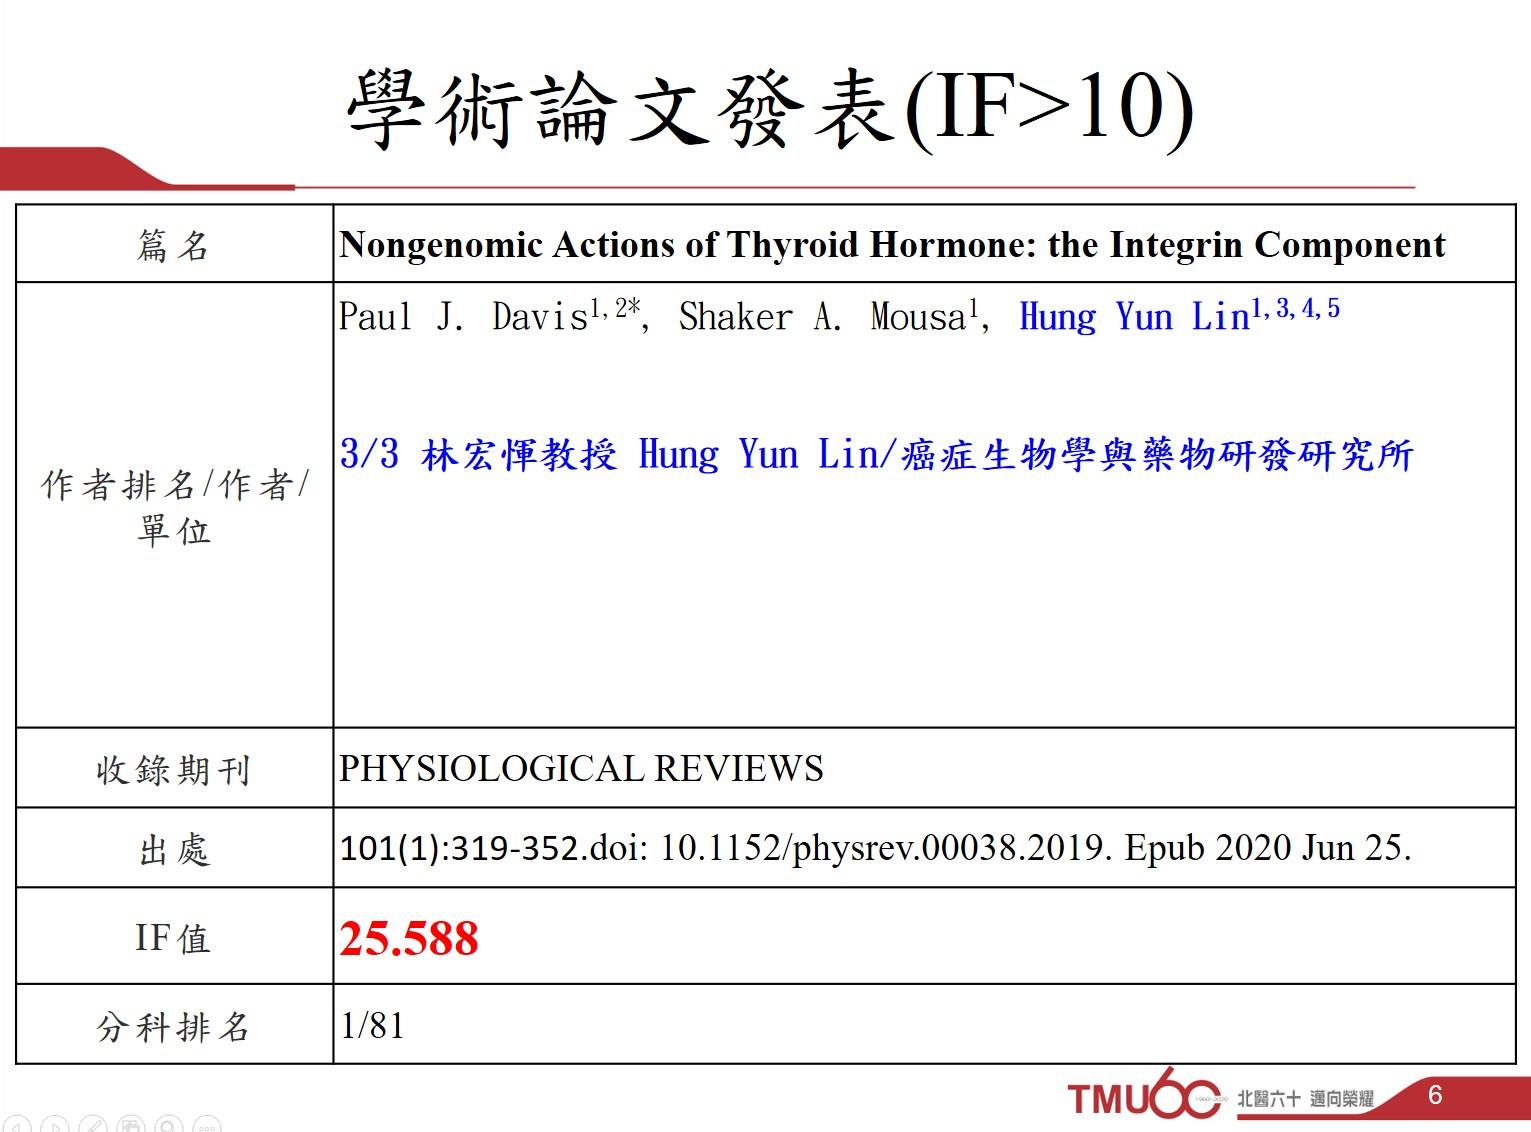 Nongenomic Actions of Thyroid Hormone: the Integrin Component